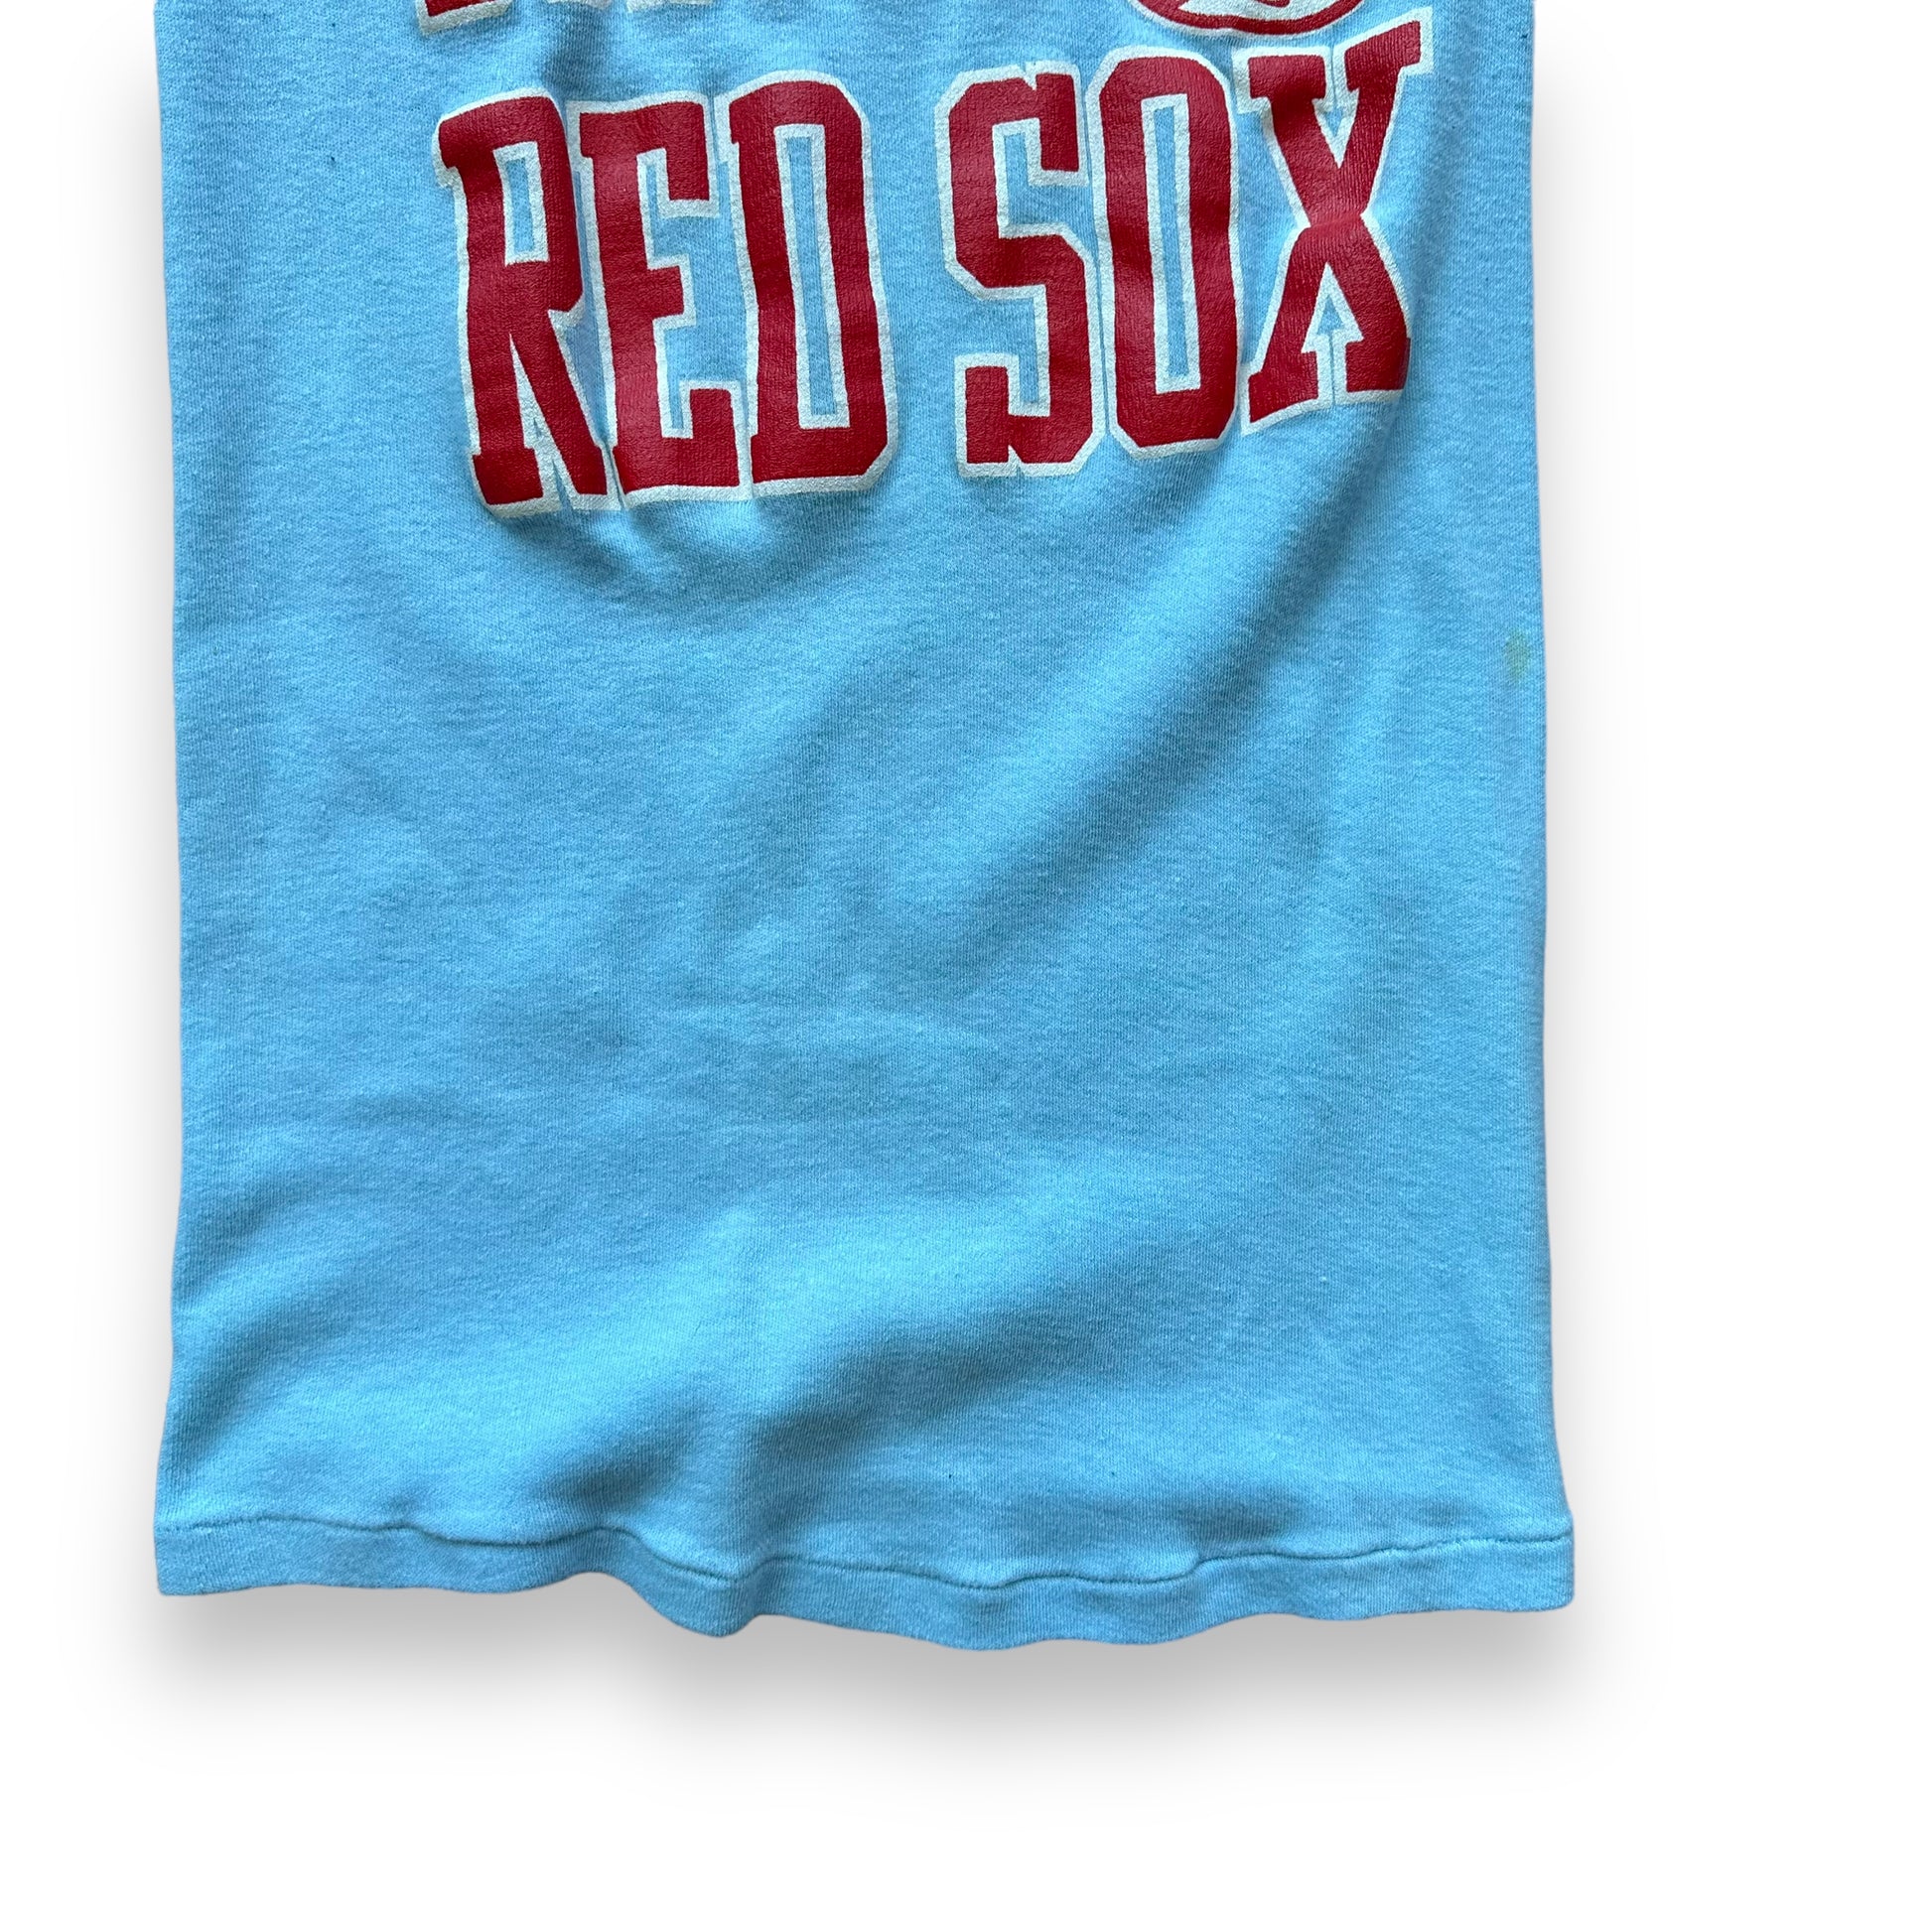 The Barn Owl Vintage Powder Blue Red Sox Ringer Tee Sz M | Vintage Red Sox T-shirts Seattle | Barn Owl Vintage Tees Seattle